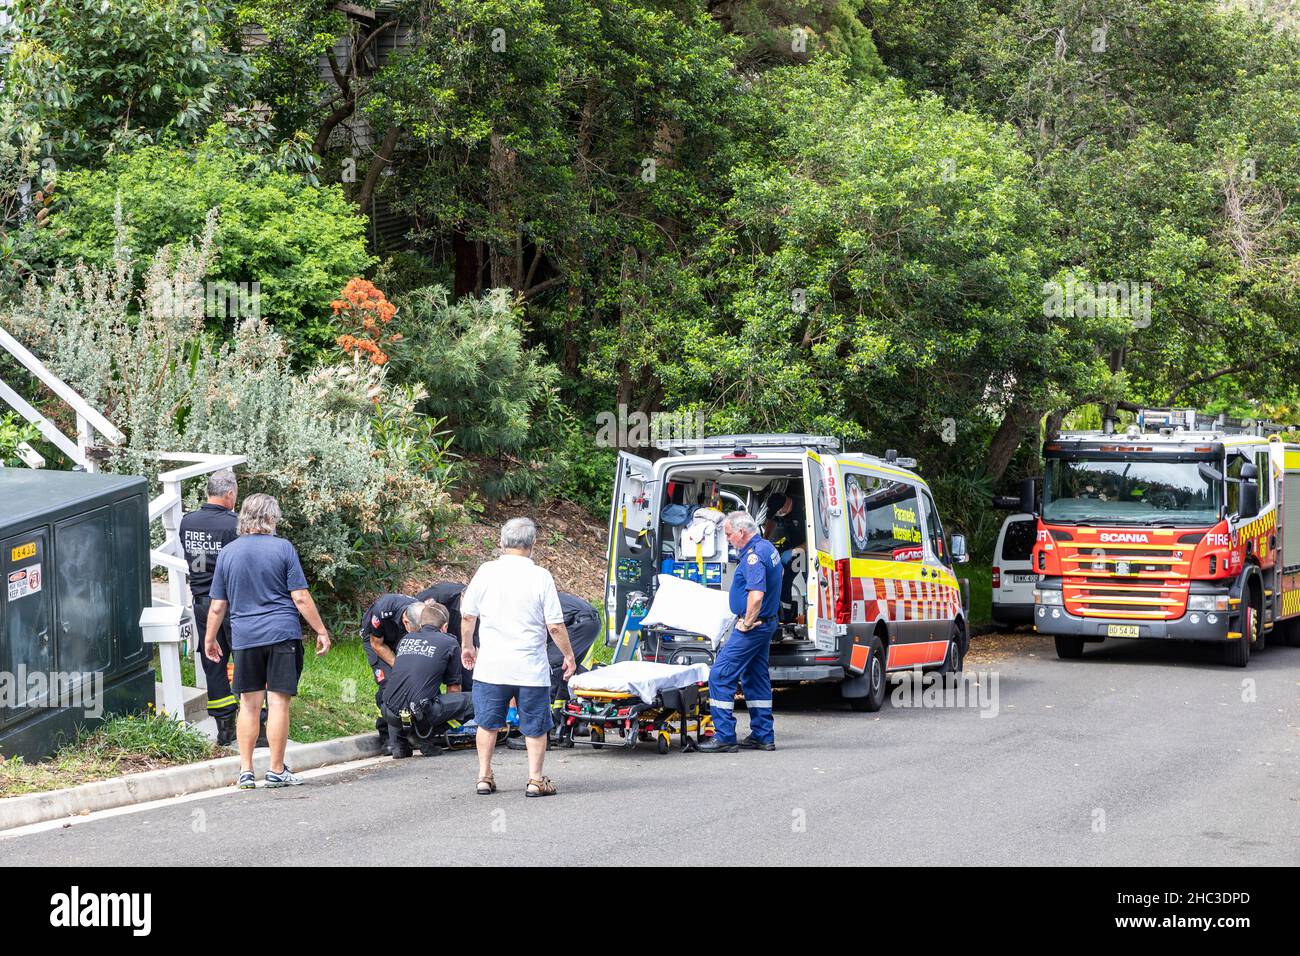 Sydney ambulance paramedic and fire personnel attend to an elderly lady who is being stretchered into the ambulance,Avalon Beach,Australia Stock Photo